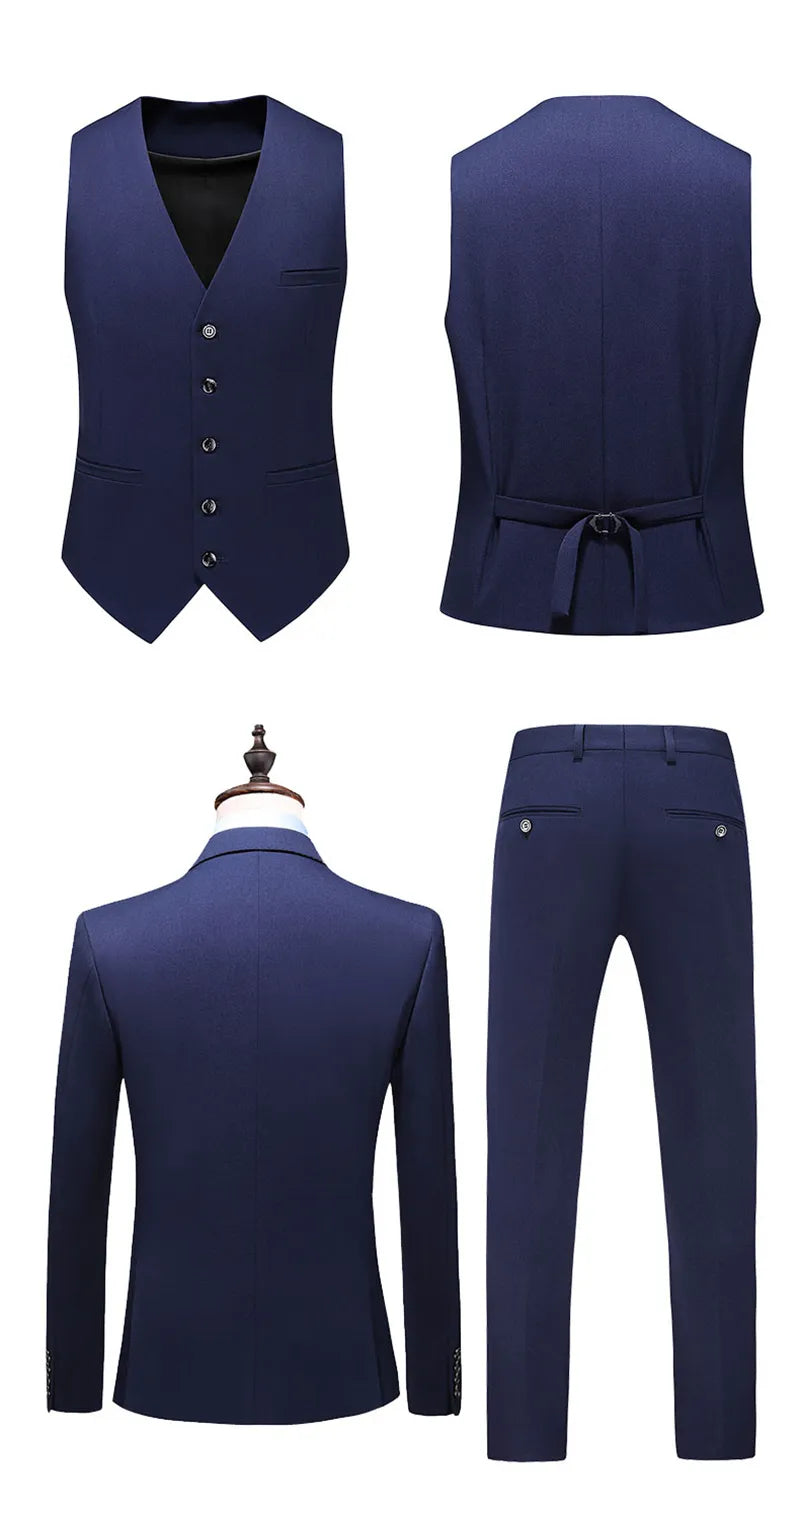 Elegant Blue Slim Fit Single Breasted Party Men's Classic Three Piece Set